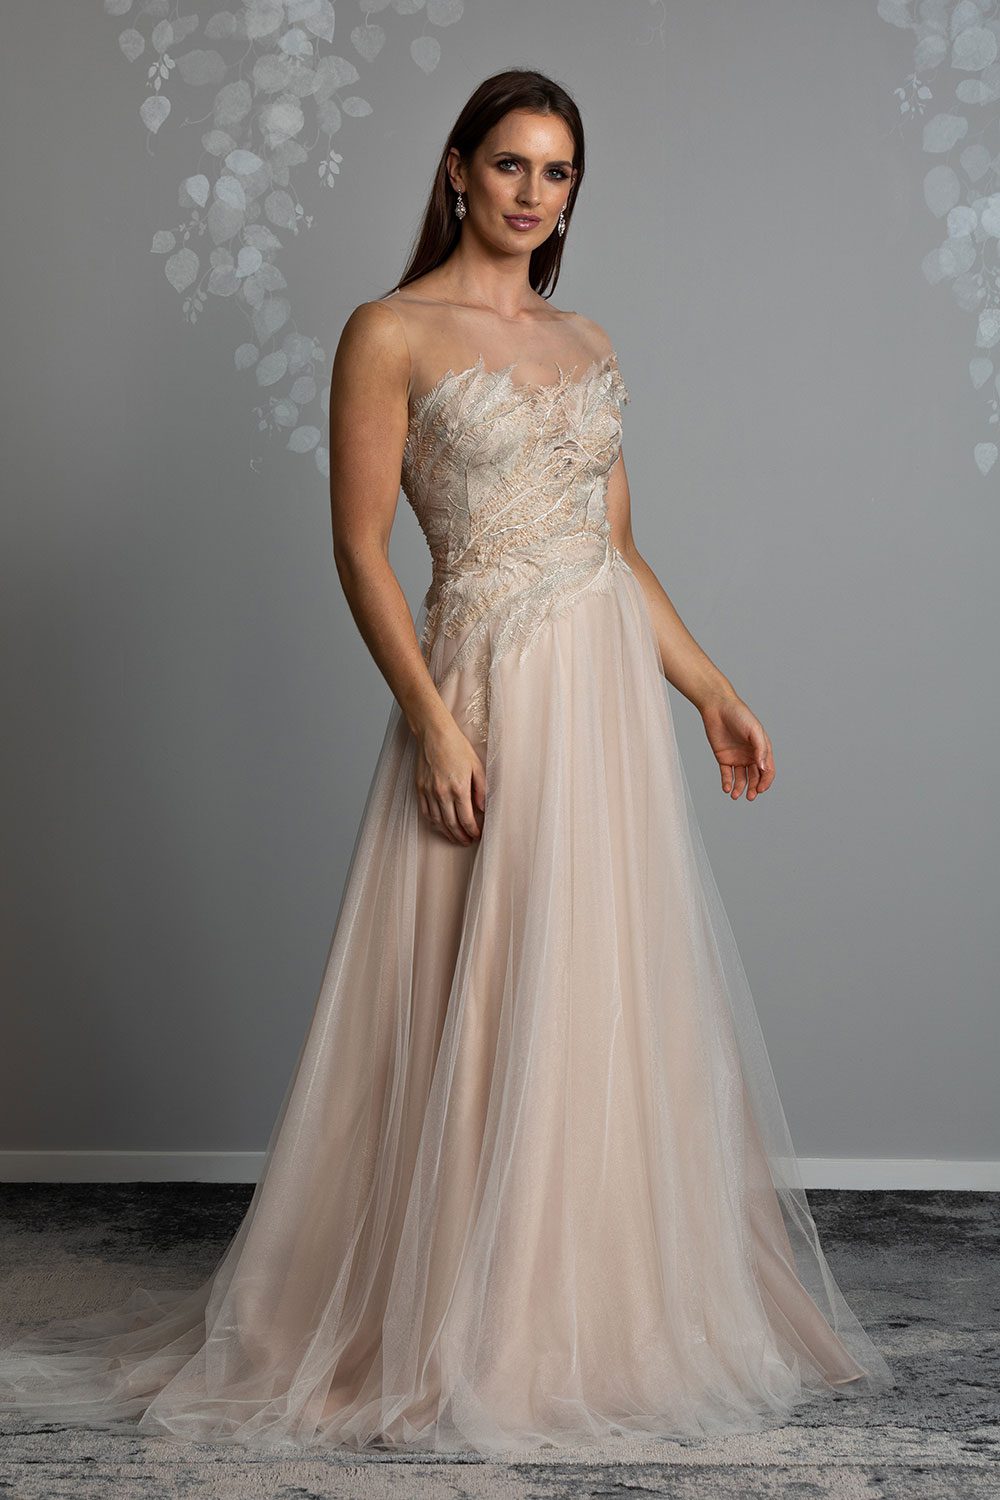 Takara Wedding Dress from Vinka Design. This glorious A-line gown is a wonderland vision in blush. Featuring a dreamscape of luxe, intricately embroidered beaded feather lace, and layers of dreamy, soft gold tulle on a blush silk organza base. Full length view of model wearing beautiful feather beaded lace gown with soft gold tulle skirt